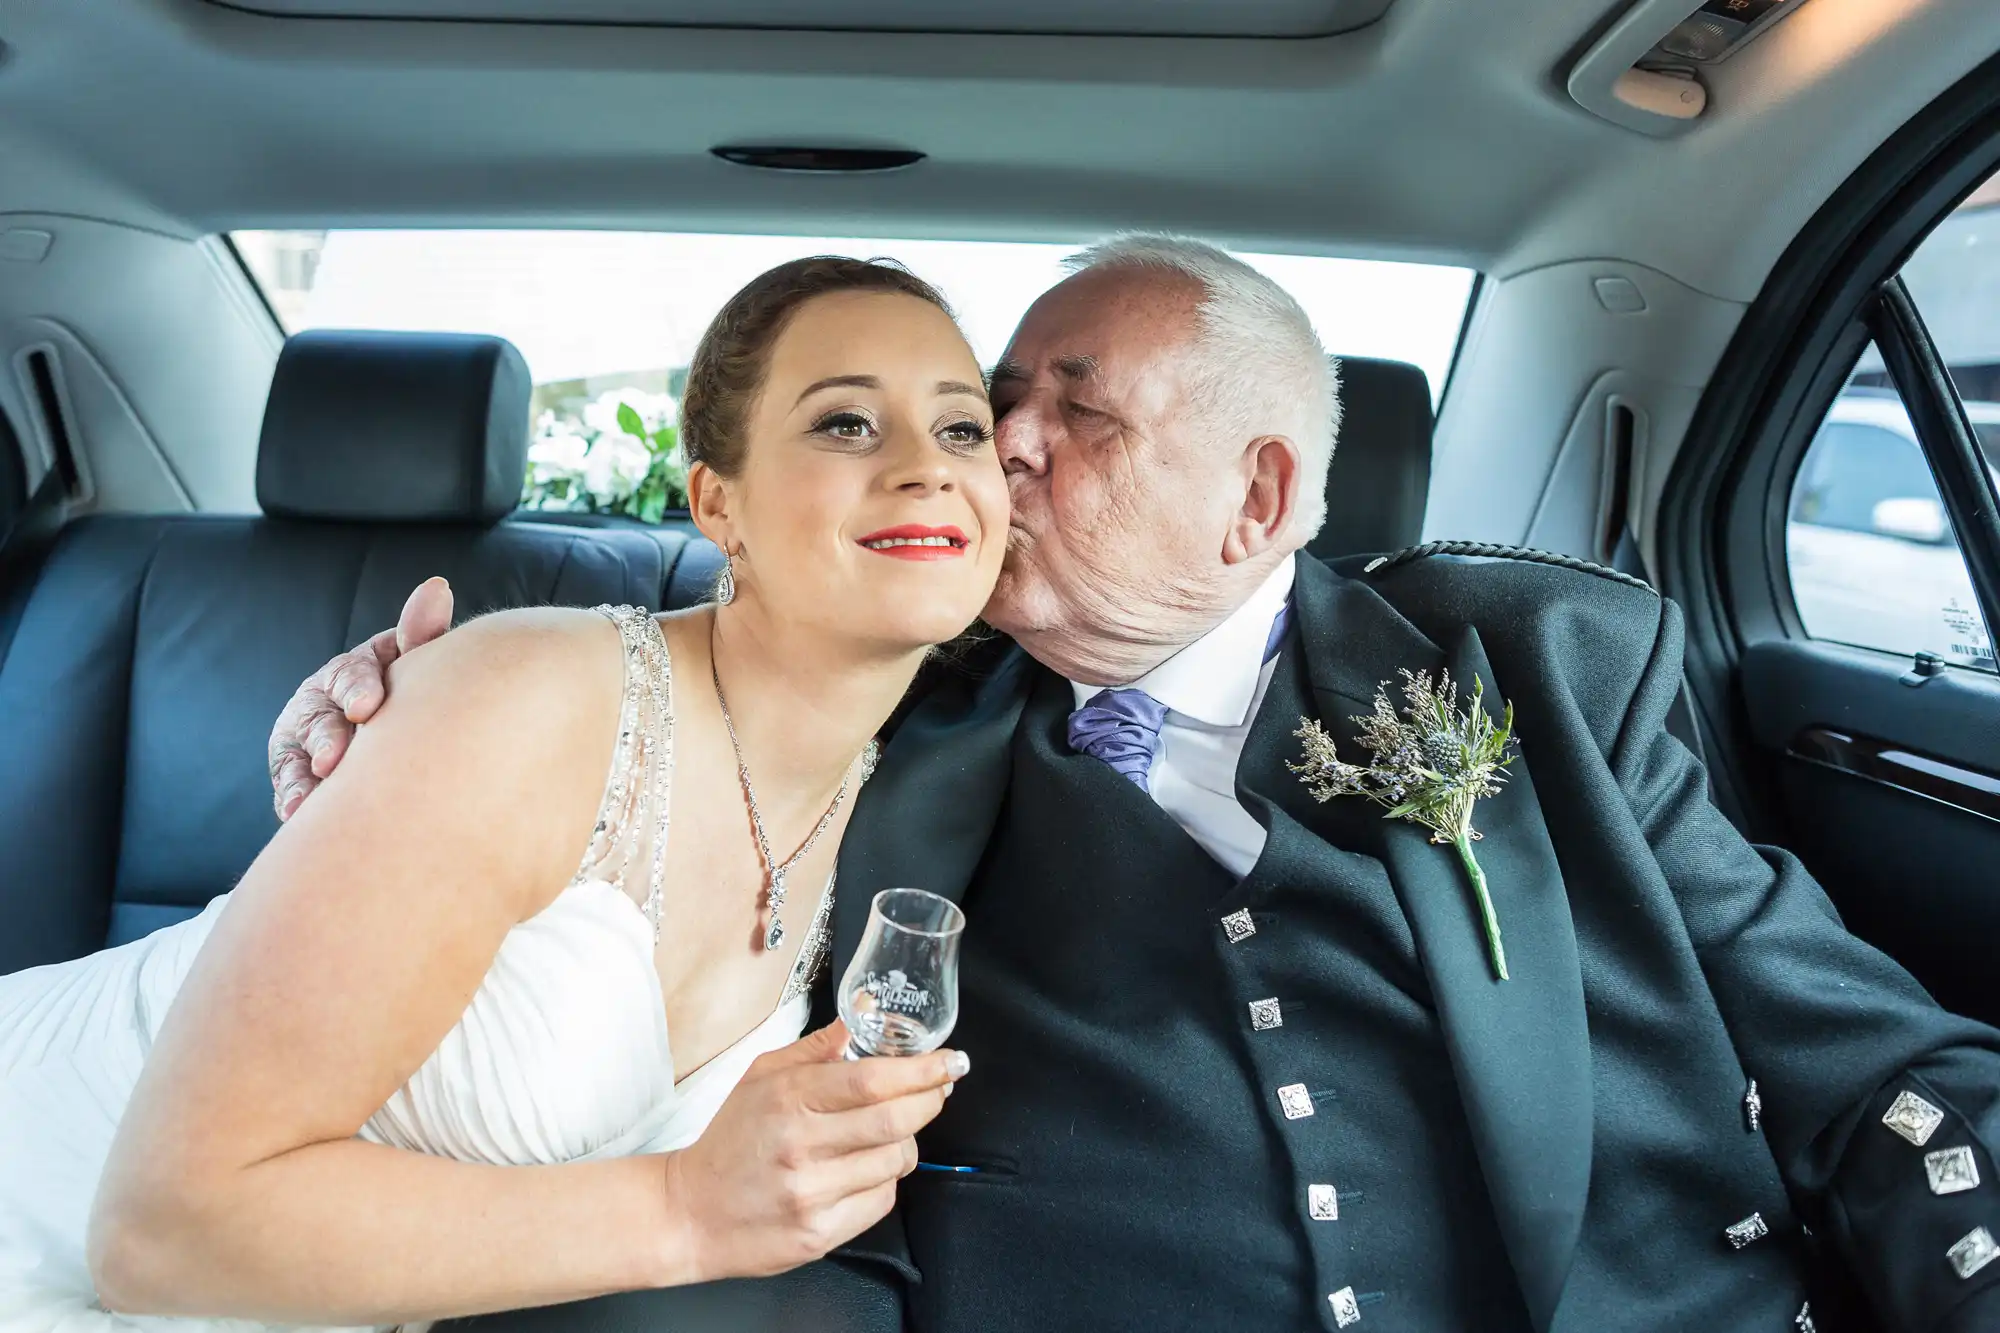 A bride in a white dress receives a kiss on the cheek from an older man in a suit inside a car.